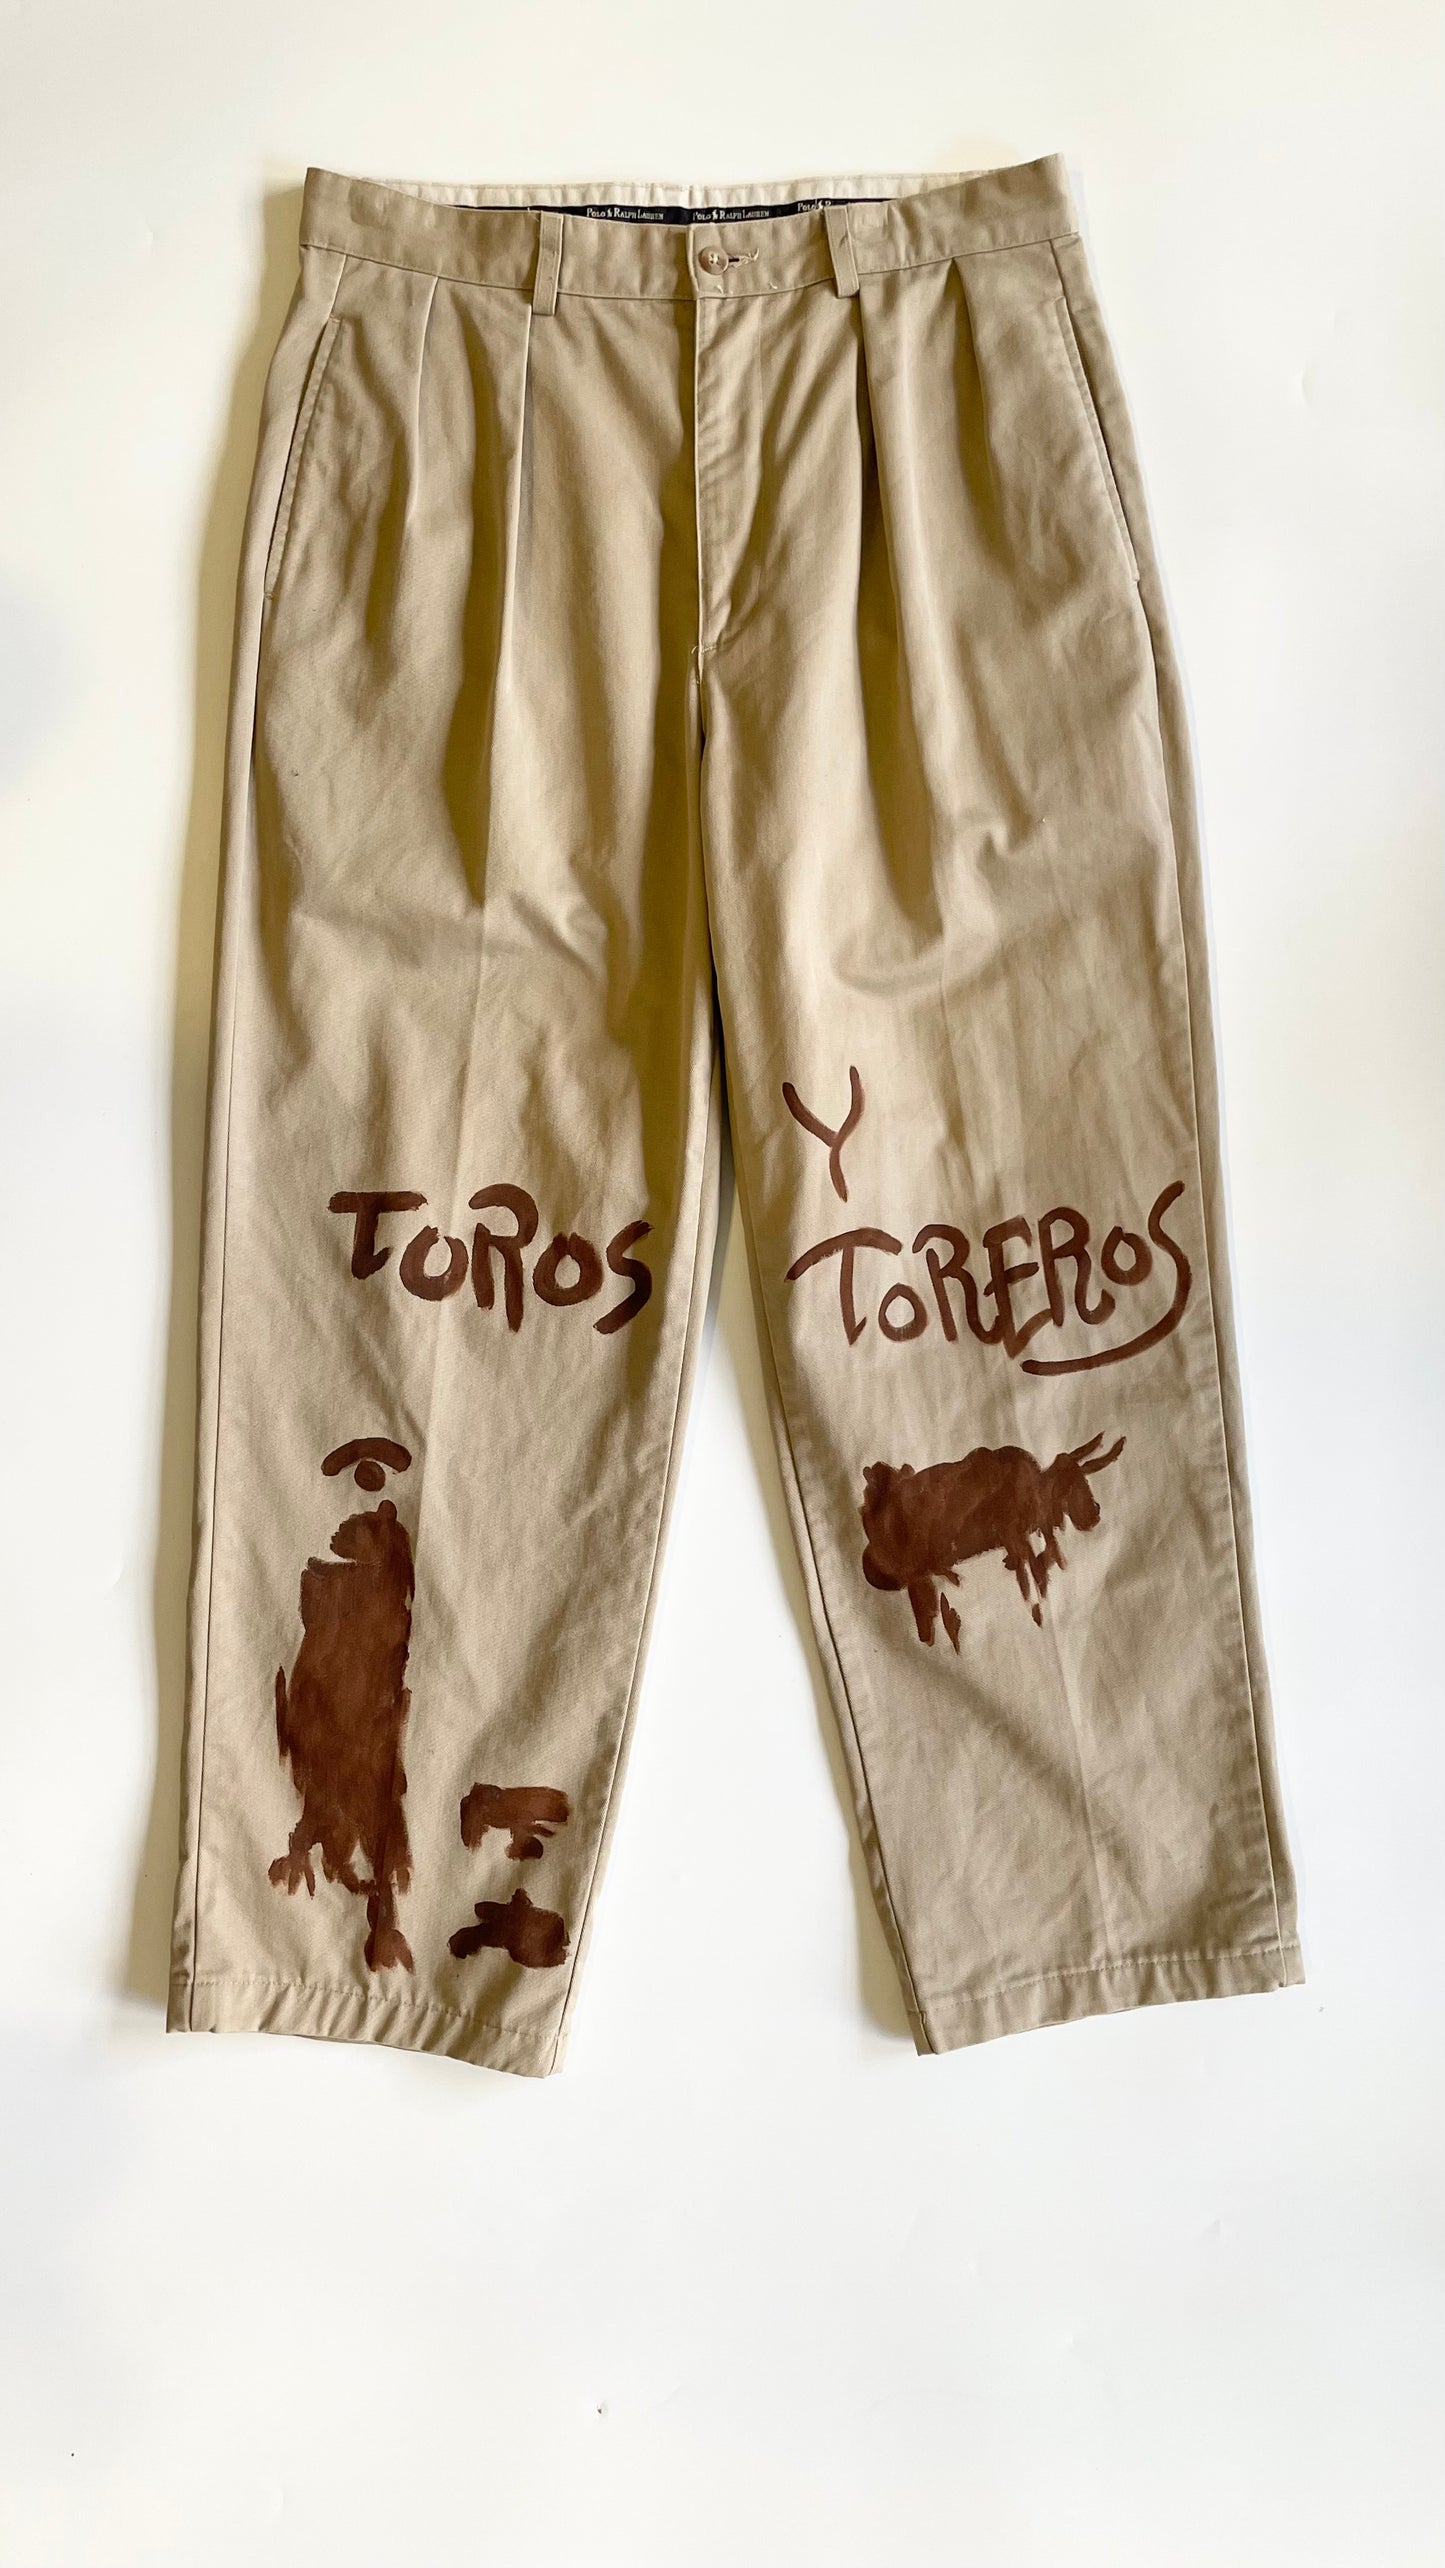 Repurposed trousers - Picasso 1 - Size 33 x 28